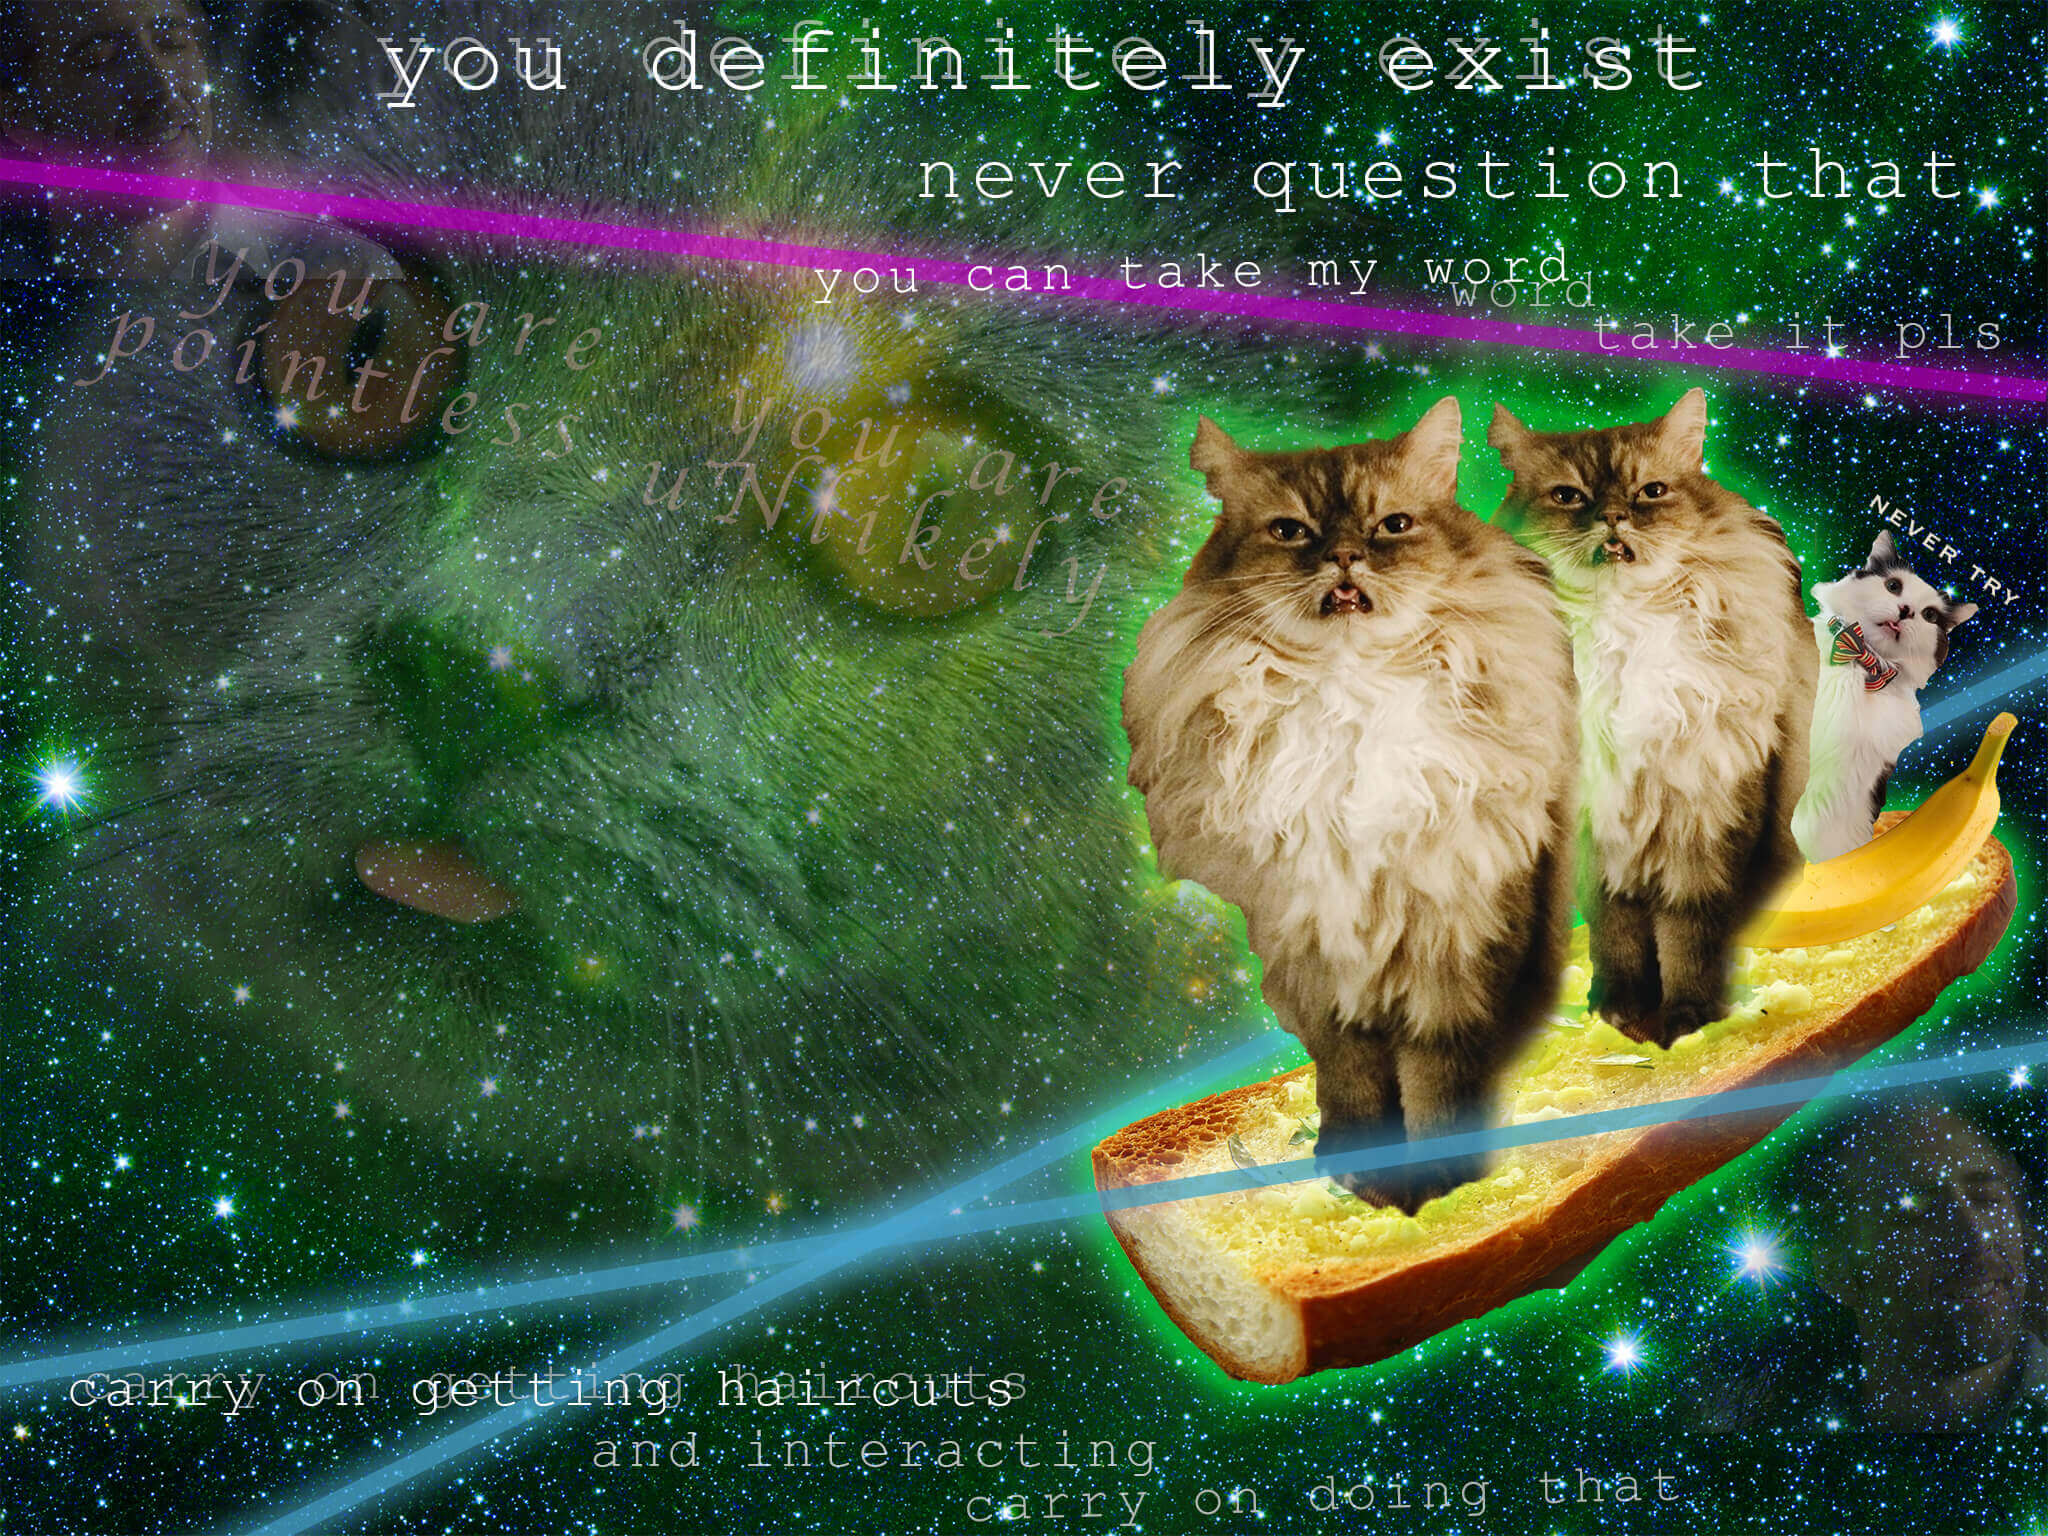 You are very unlikely, but you do exist, as does Space Blep Cat